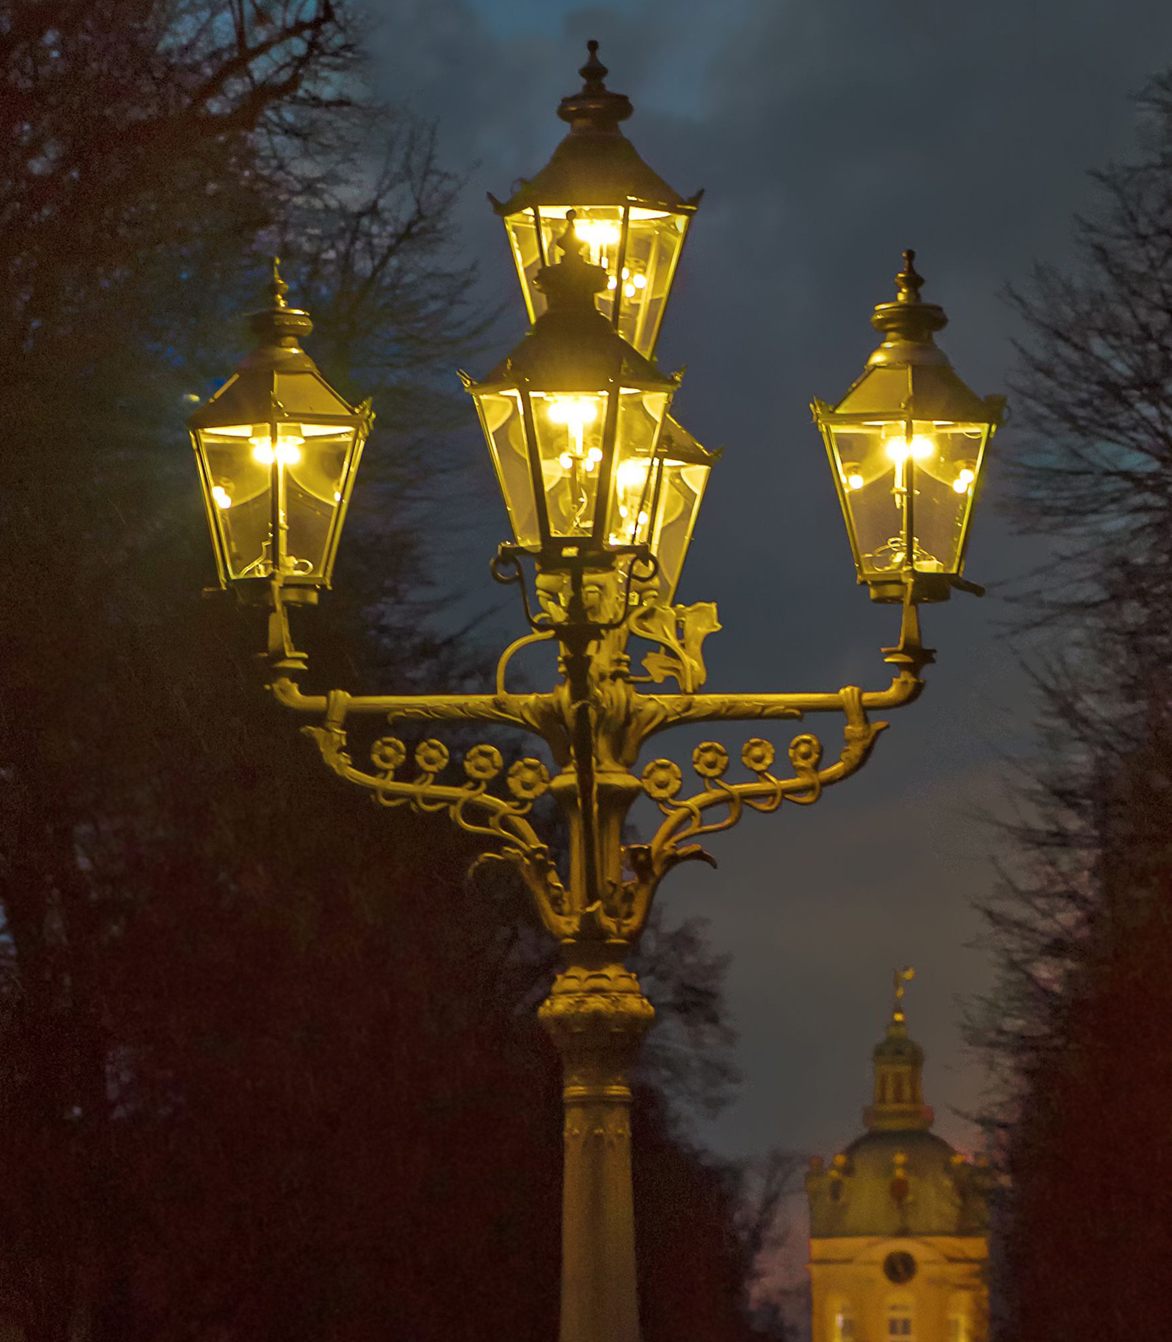  “Considering gas lights from a technological point of view, there’s no reason to keep them on the streets, they belong in a museum,” says Stephan Völker, a light technology expert.